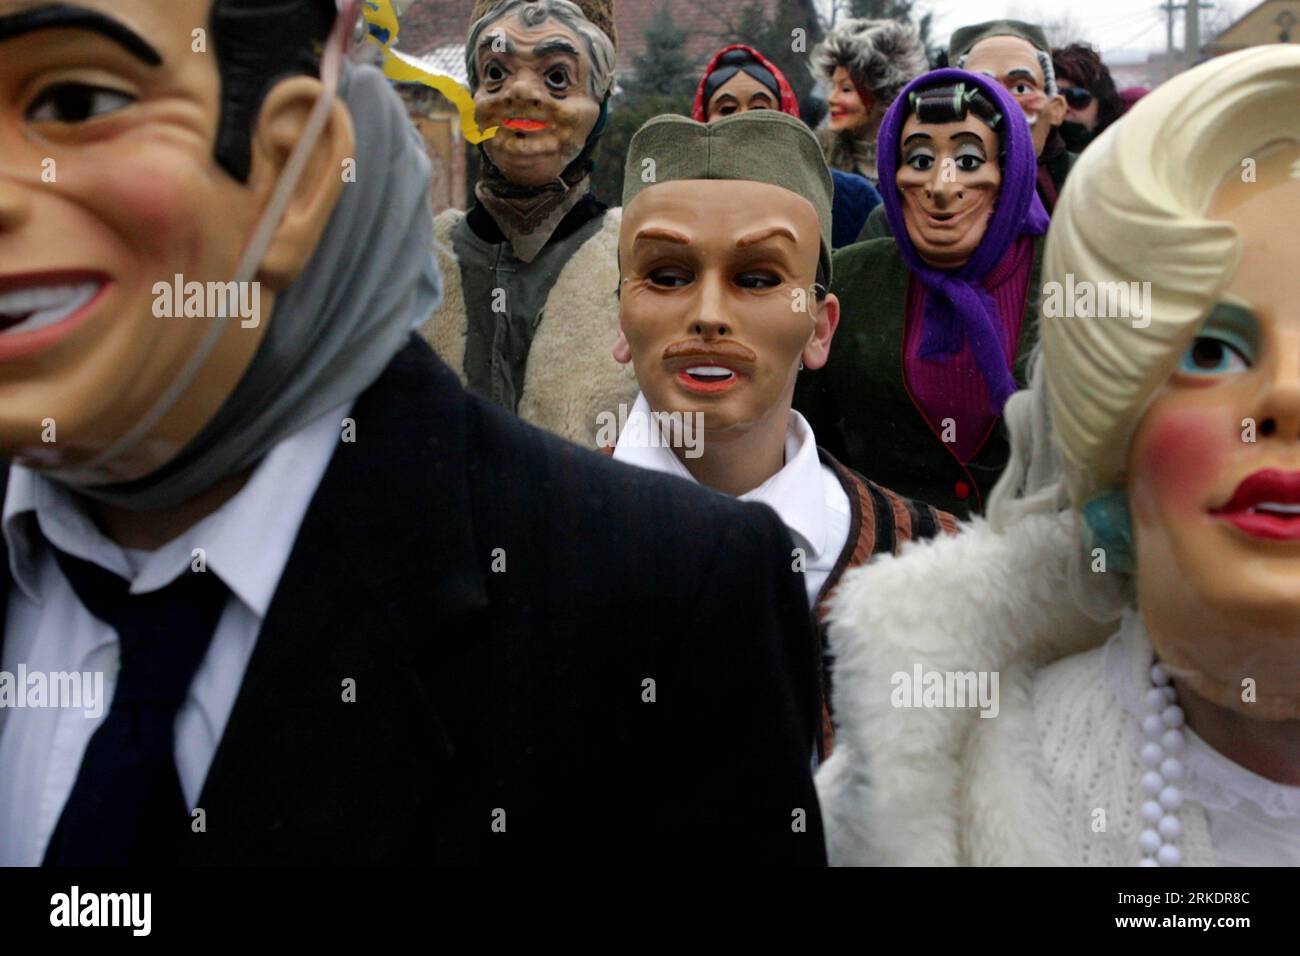 Bildnummer: 54988371  Datum: 06.03.2011  Copyright: imago/Xinhua (110306) -- GLAVICA, March 6, 2011 (Xinhua) -- A Newlyweds in masks from village Glavica go to church in nearby town Paracin, during a marriage parade, 200 km. southeast of Belgrade, Serbia, March 6, 2011. This is a part of Serbian traditional manifestation from the mid 19th century, which is named Komendija , meaning comedy in Serbian rustic language. Across Serbia, gather in villages to celebrate the end of White Week, an old traditional festivity. Various magic acts, ways of dressing, songs and dances of the participants had p Stock Photo